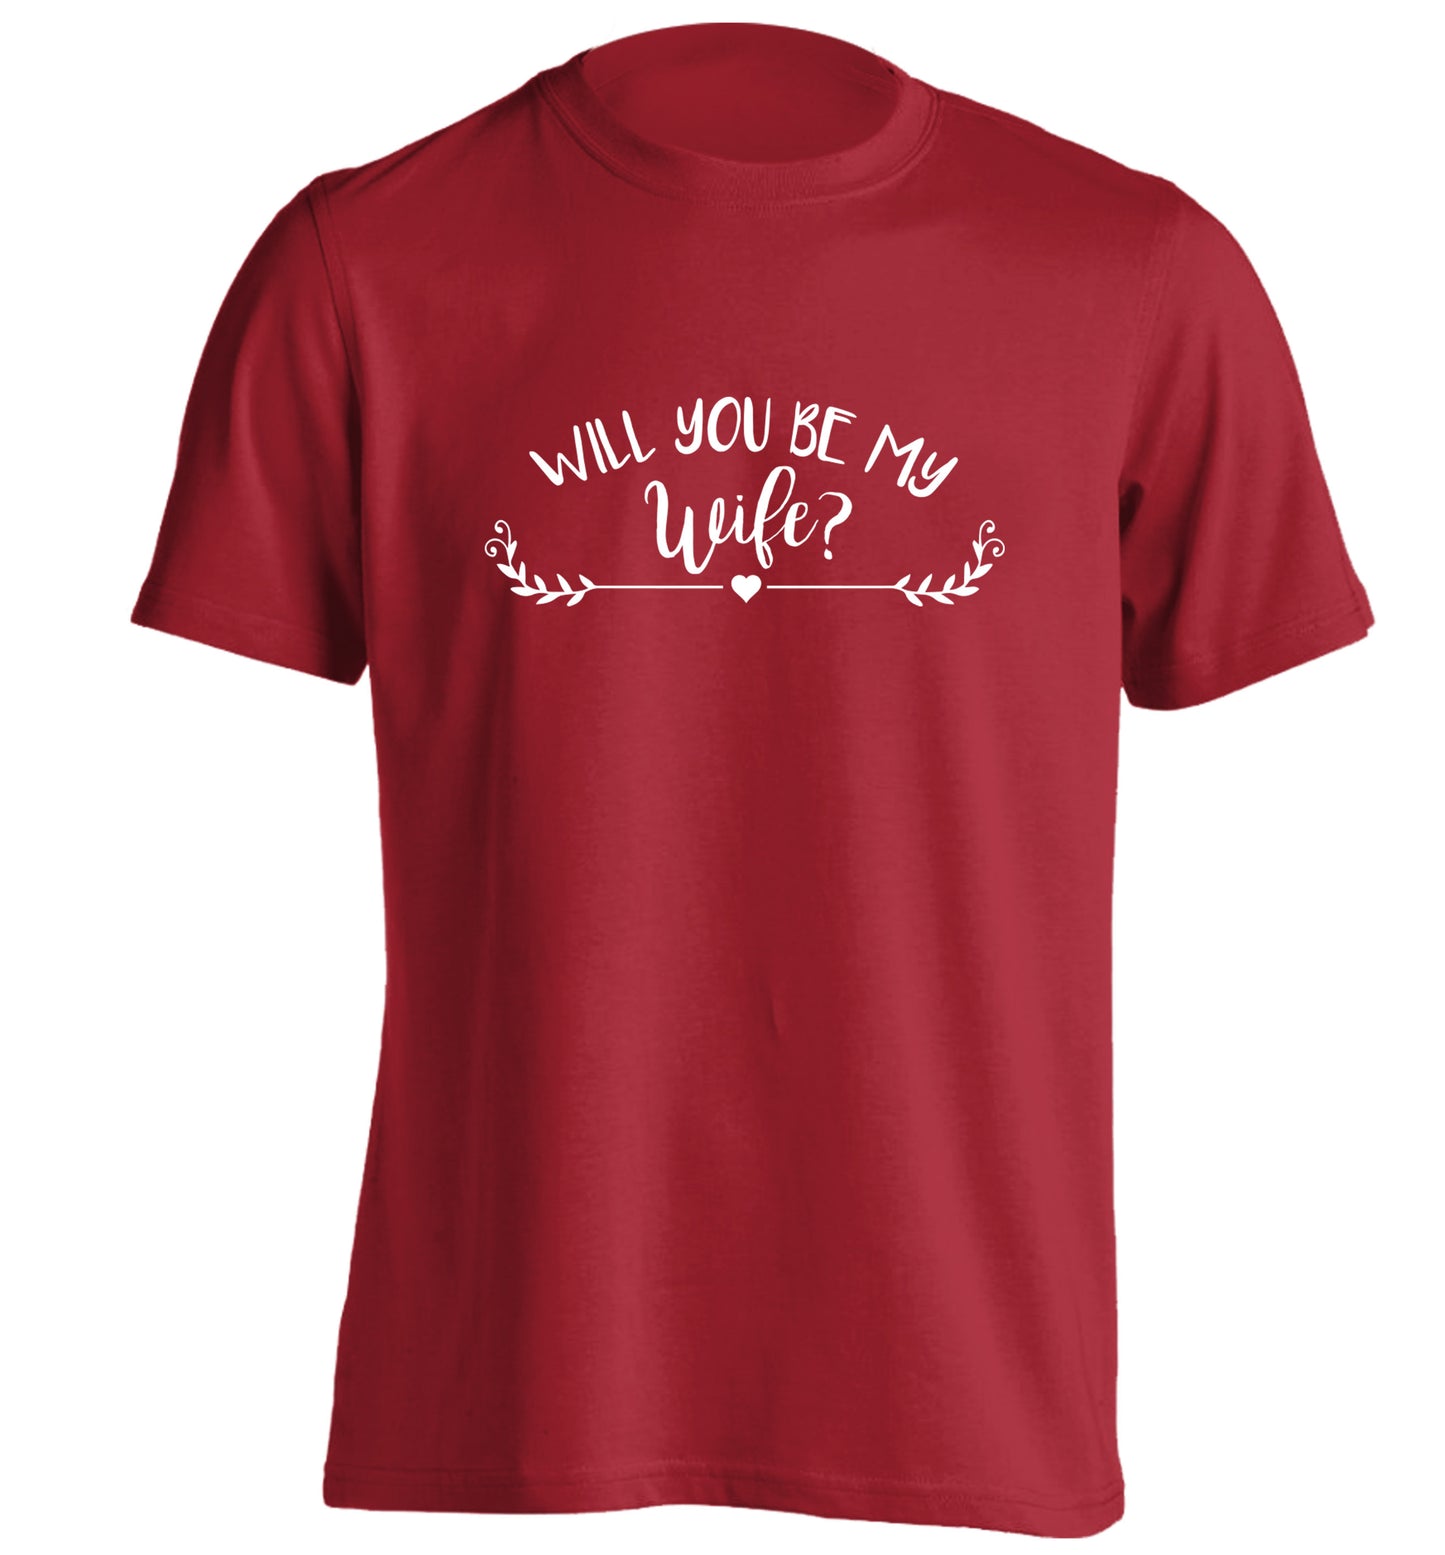 Will you be my wife? adults unisex red Tshirt 2XL